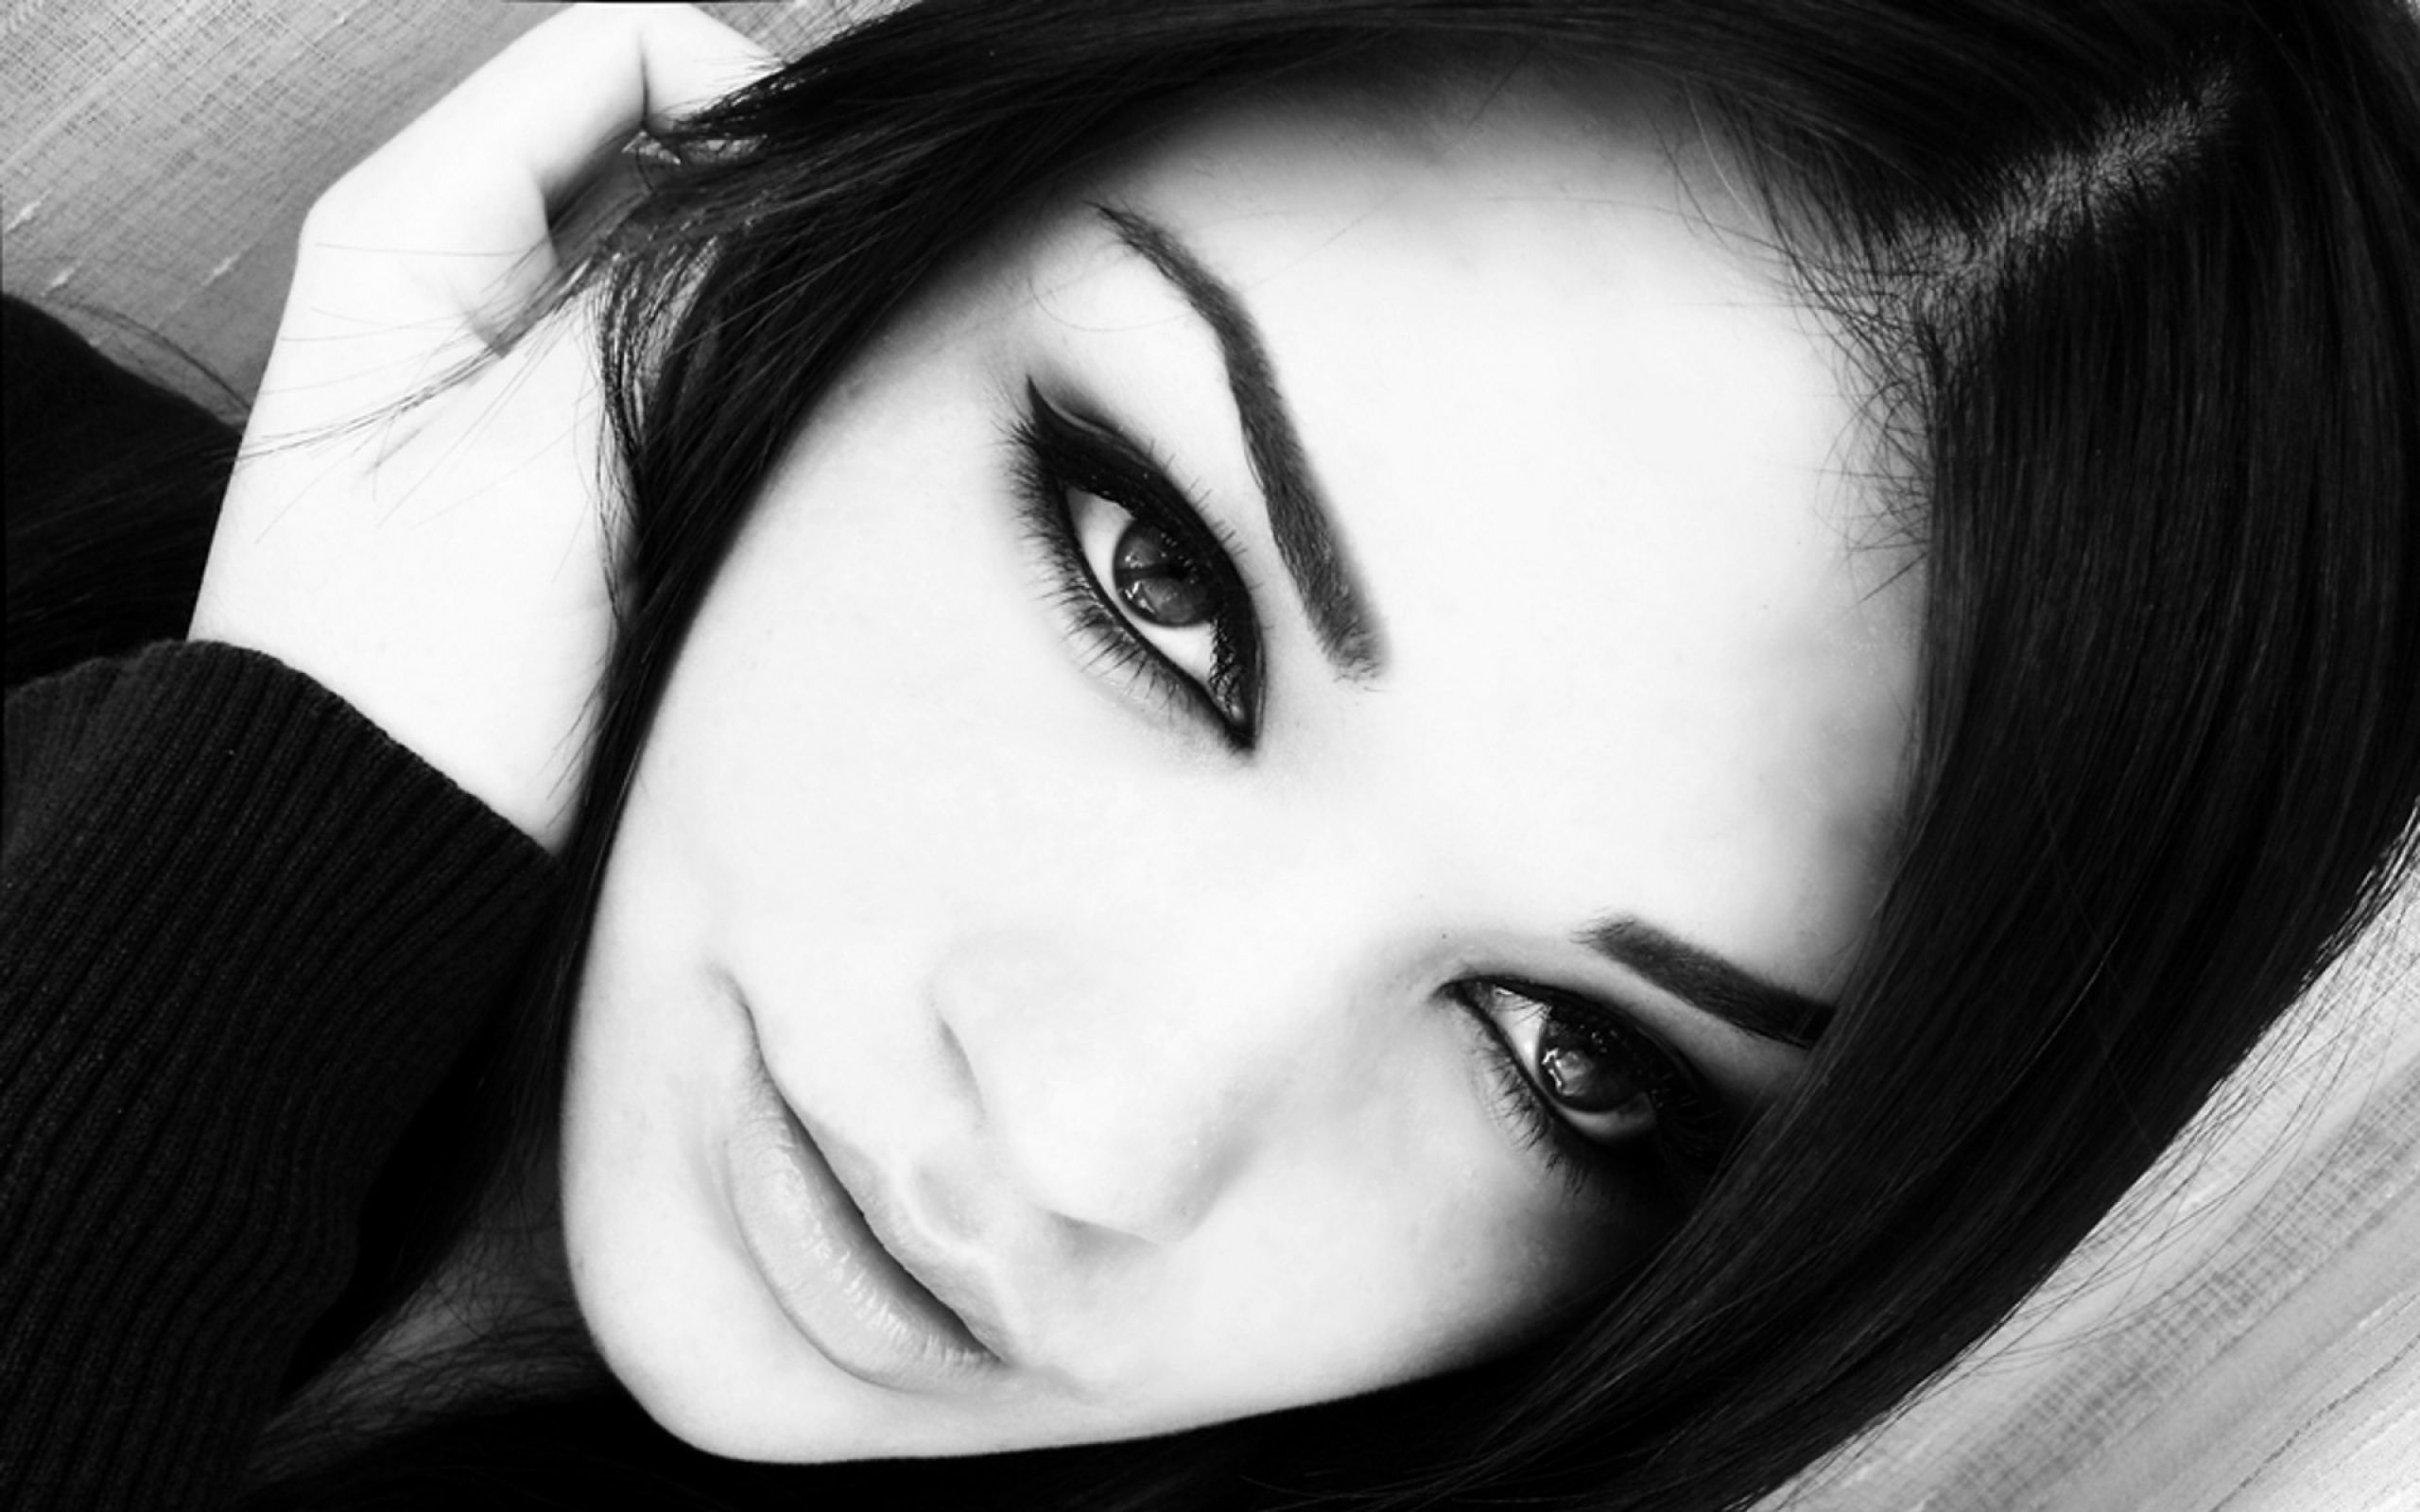 Beautiful face black and white HD Wallpaper. Background Image